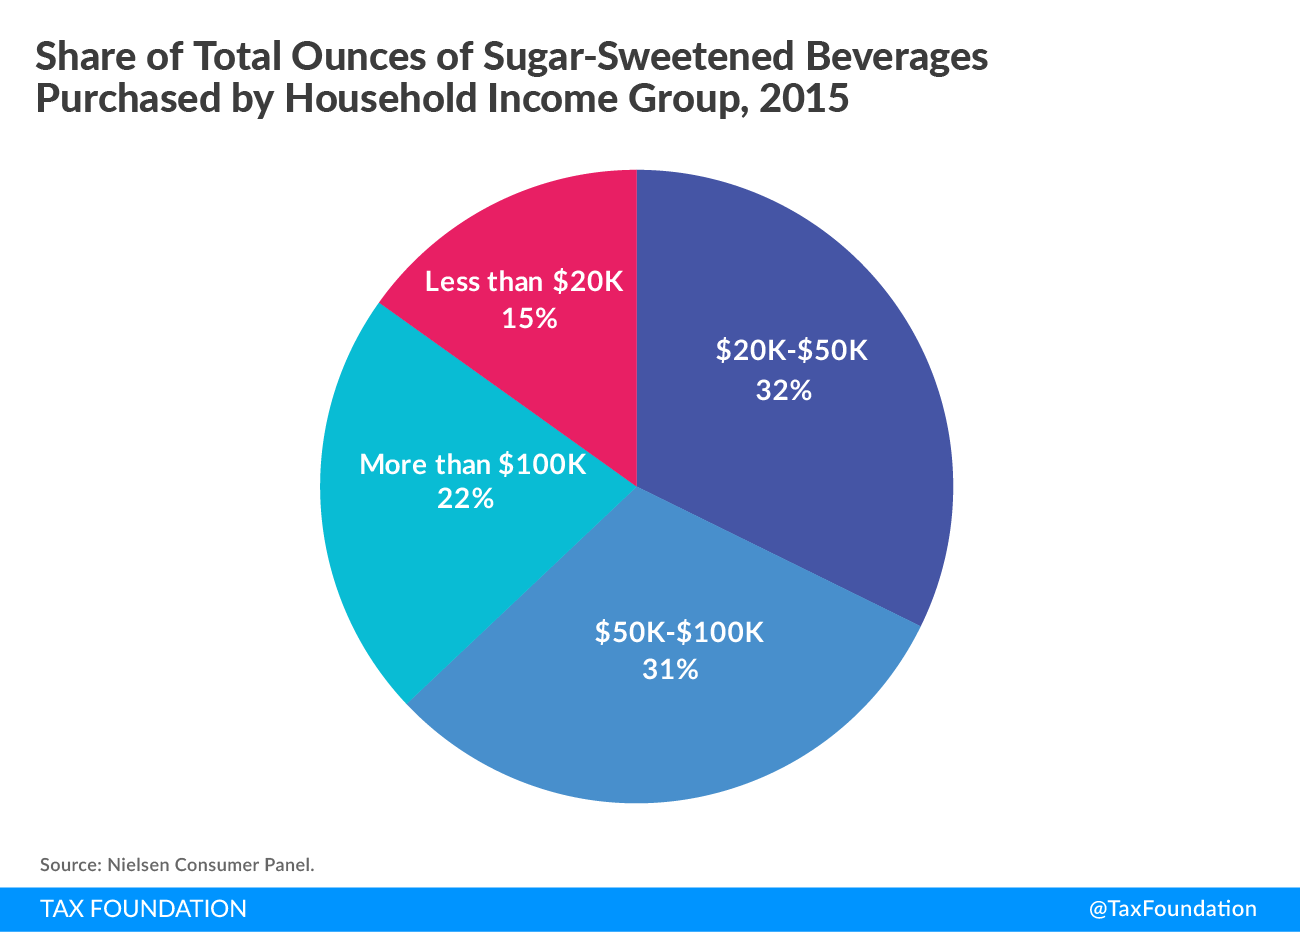 Share of Total Ounces of Sugar-Sweetened Beverages Purchased by Household Income Group Pie Chart Soda Taxes Sugar-Sweetened Beverage Taxes